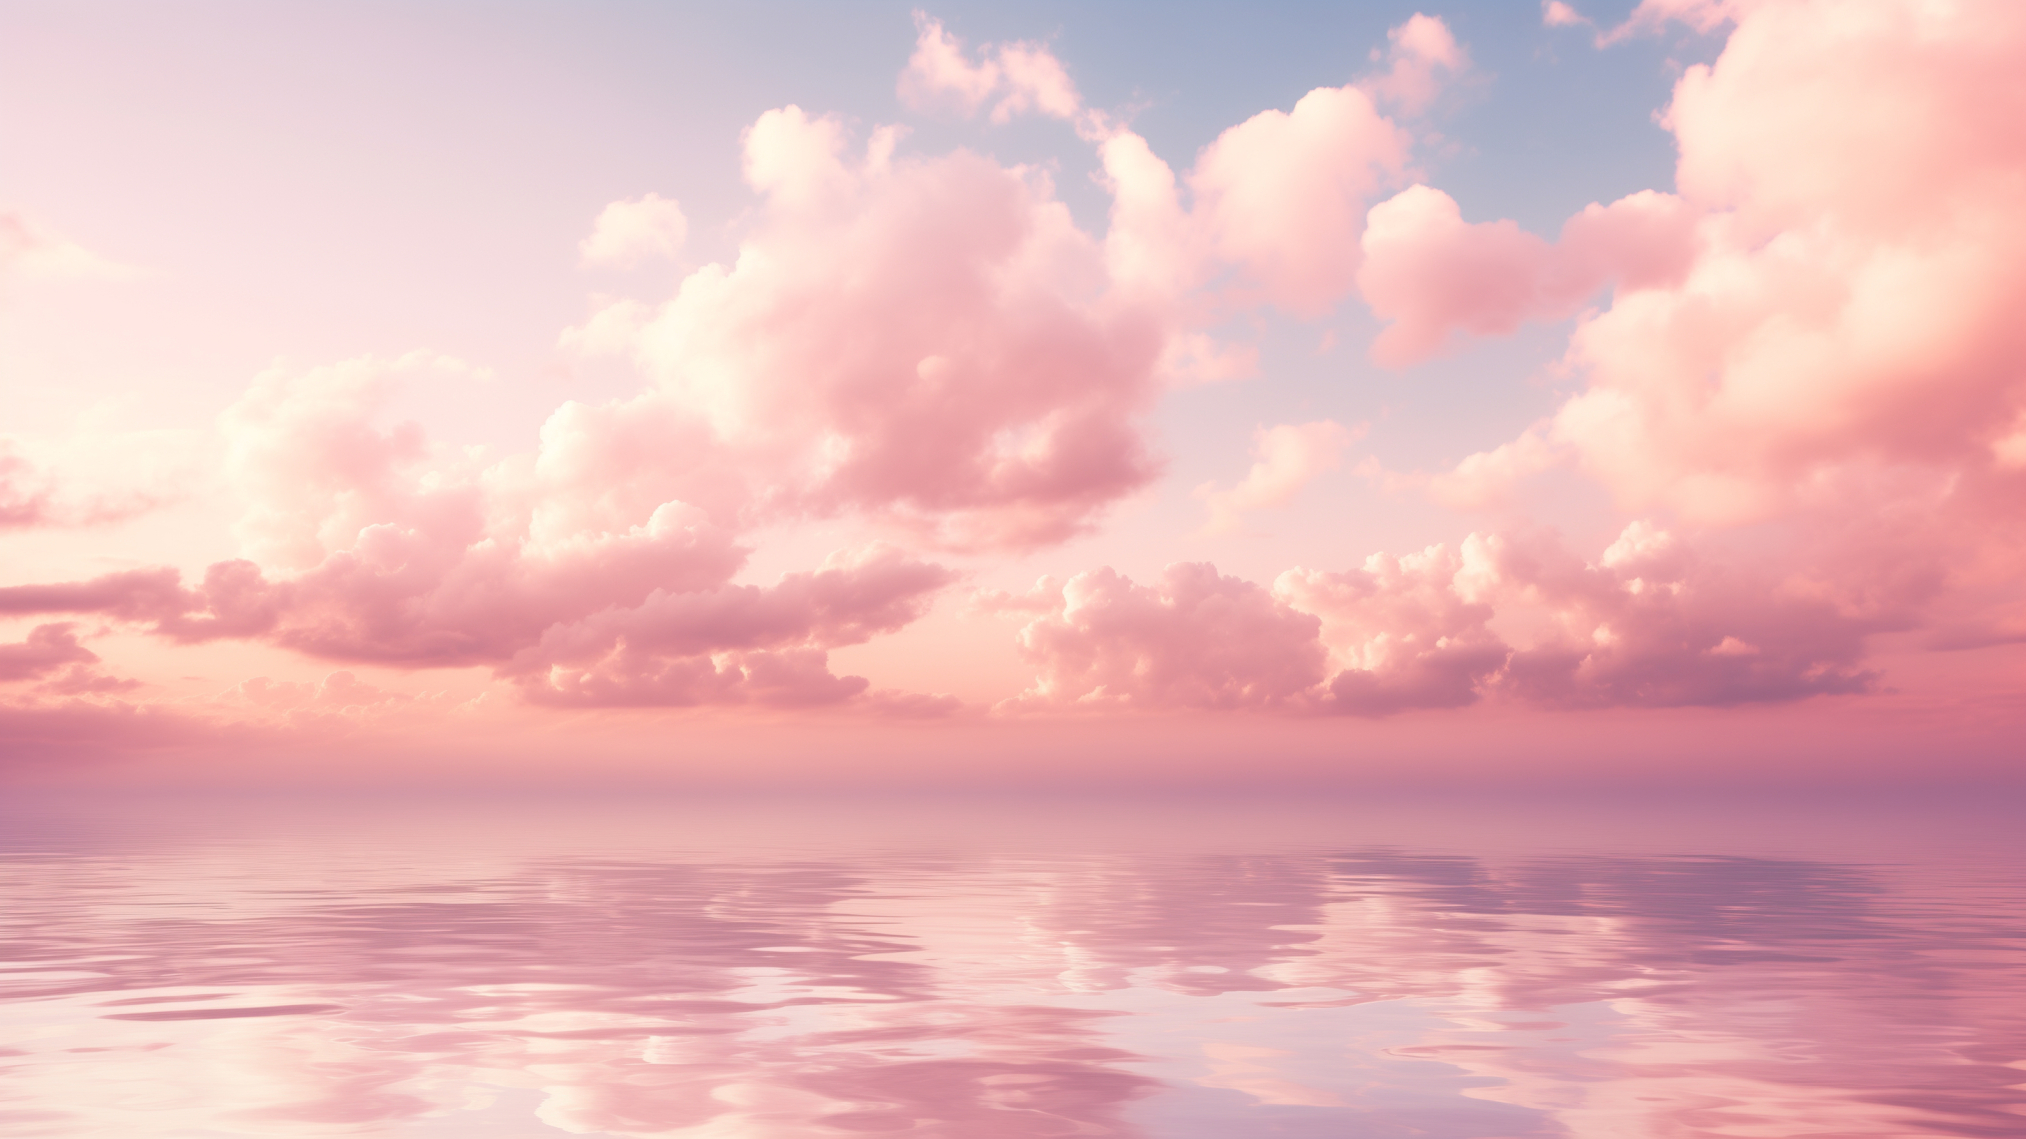 2026x1139 Resolution Pink Aesthetic Sky HD Calm and Beautiful 2026x1139 ...